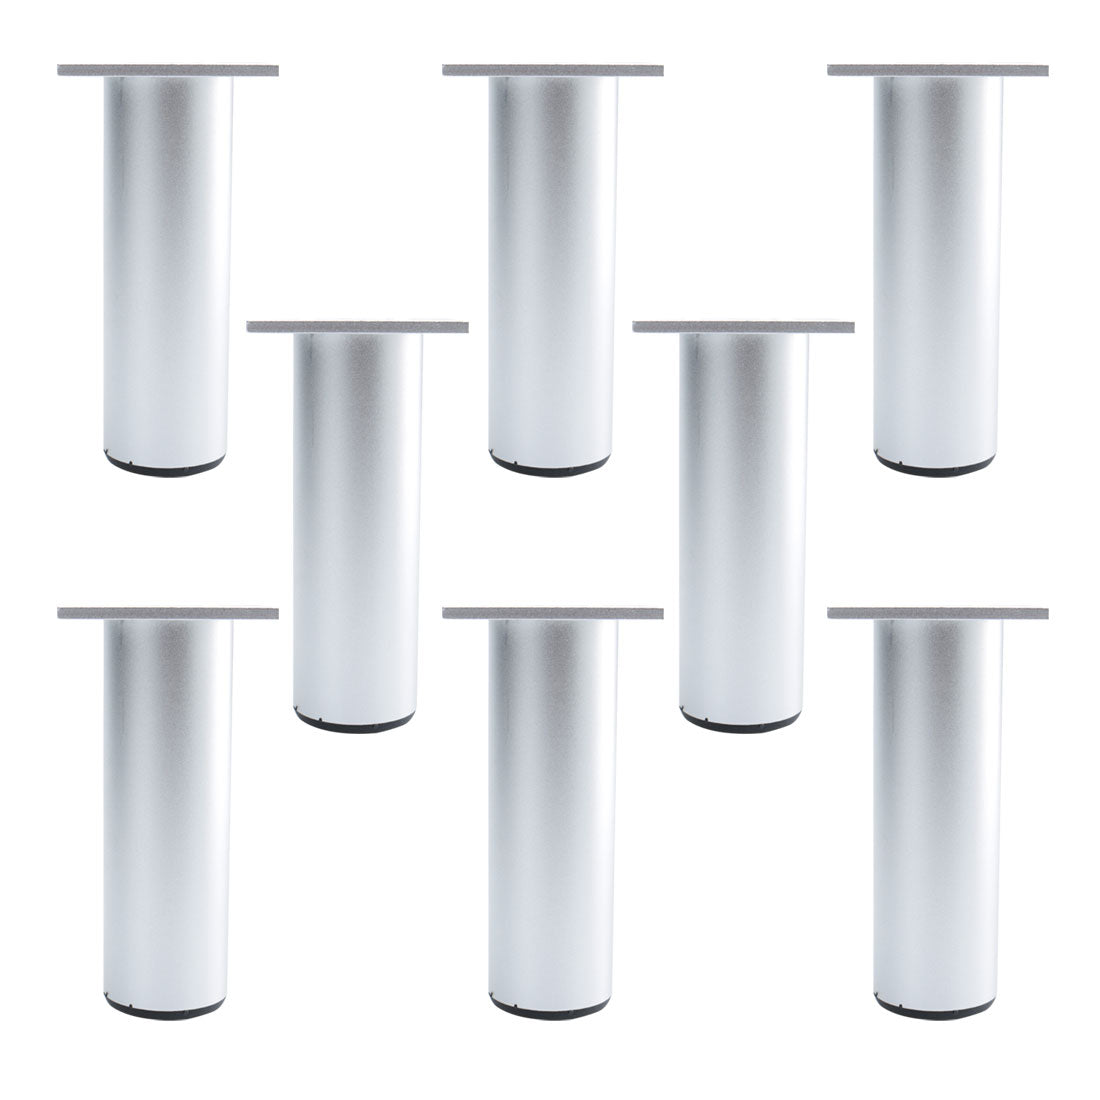 uxcell Uxcell Round Furniture Leg Aluminium Alloy Table Feet Replacement Height Adjuster 8pcs